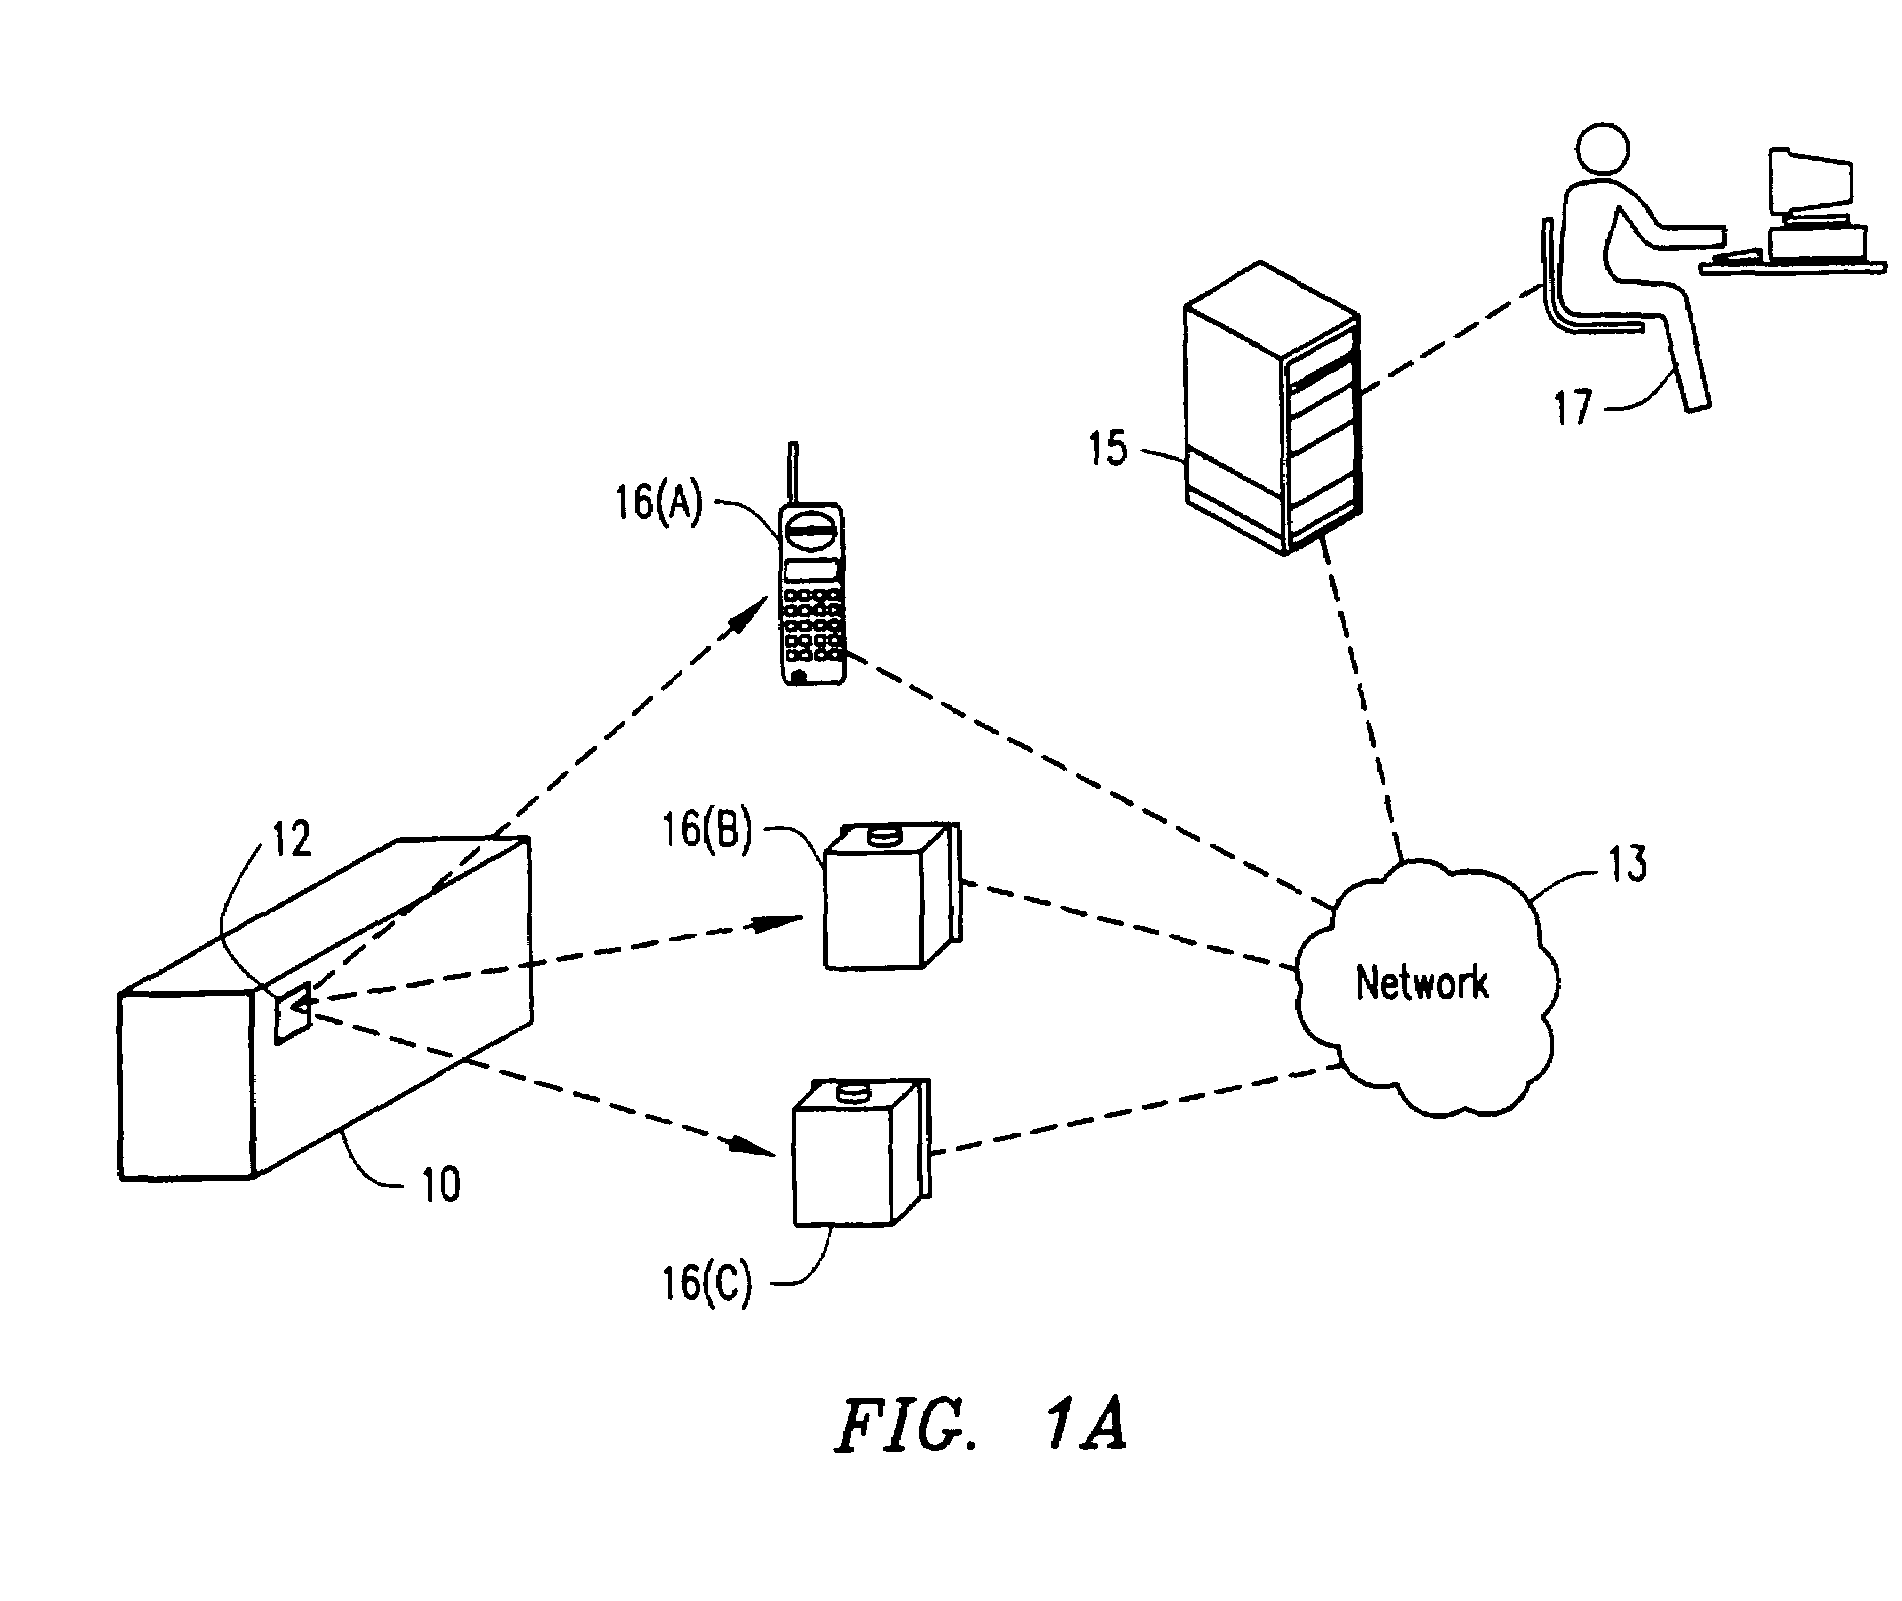 Method and system for monitoring containers to maintain the security thereof